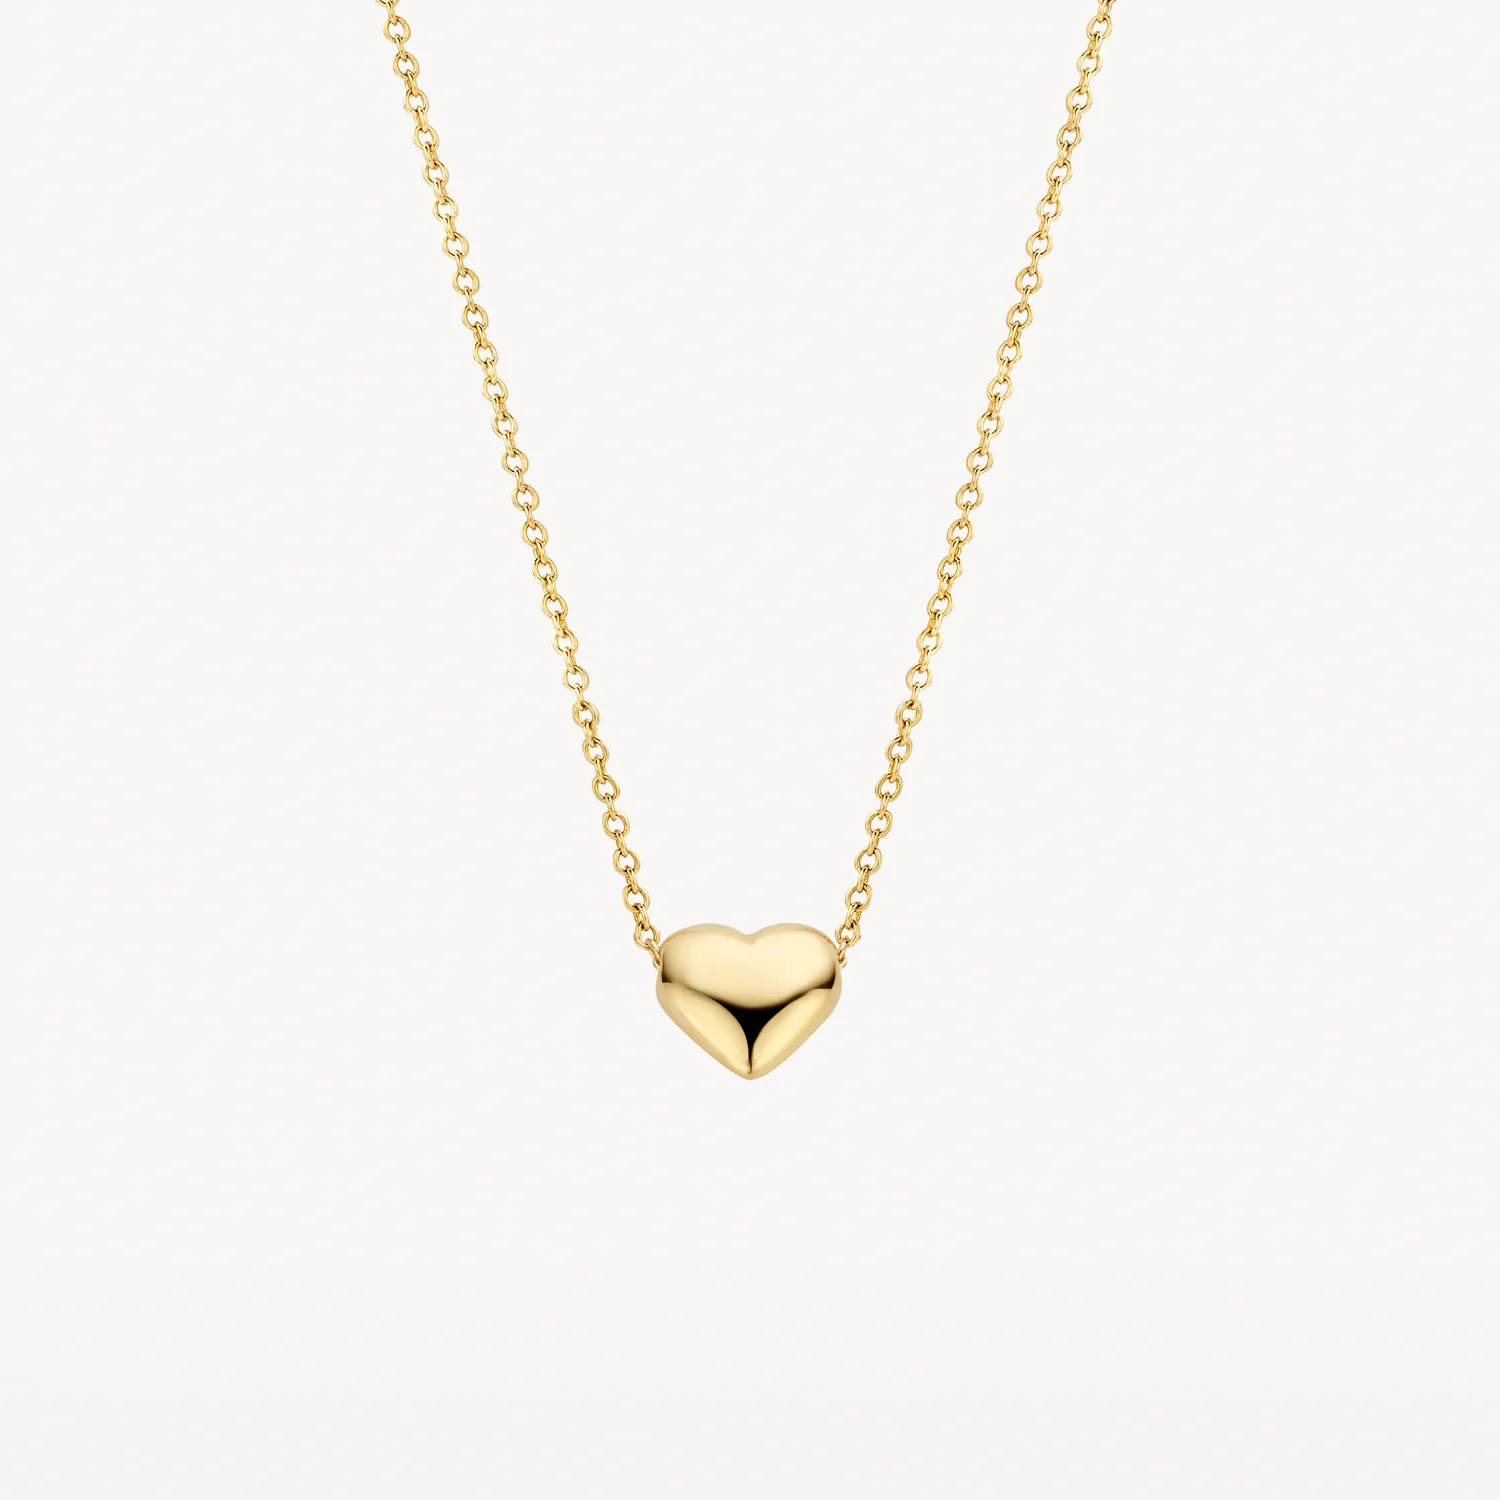 Blush Yellow Gold Small Heart Necklace